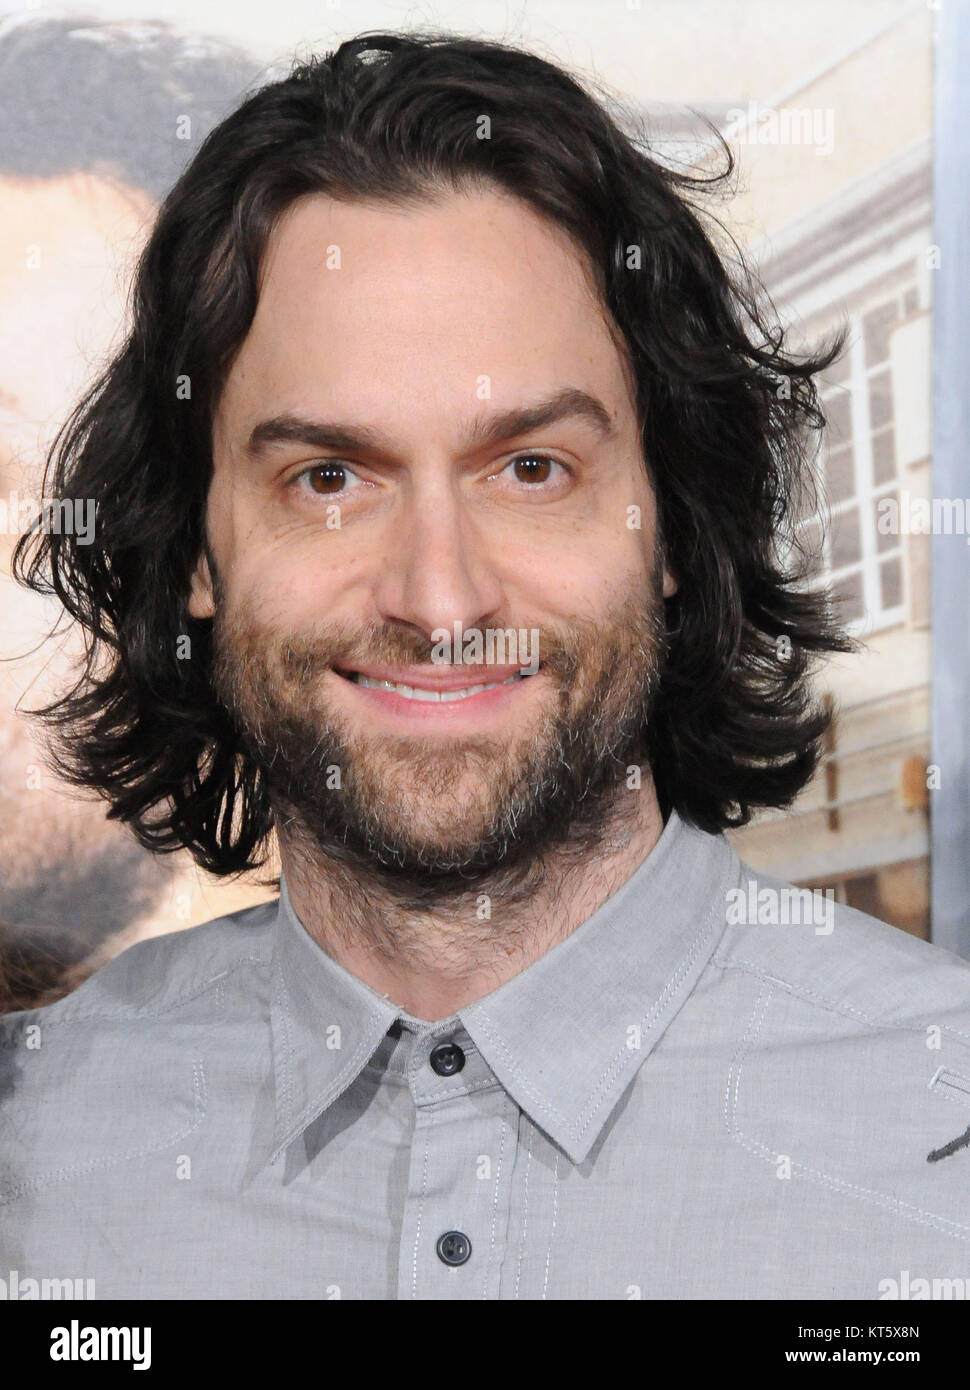 LOS ANGELES, CA - FEBRUARY 13: Actor Chris D'Elia attends the world premeire of 'Fist Fight' at Regency Village Theatre on February 13, 2017 in Los Angeles, California. Photo by Barry King/Alamy Stock Photo Stock Photo